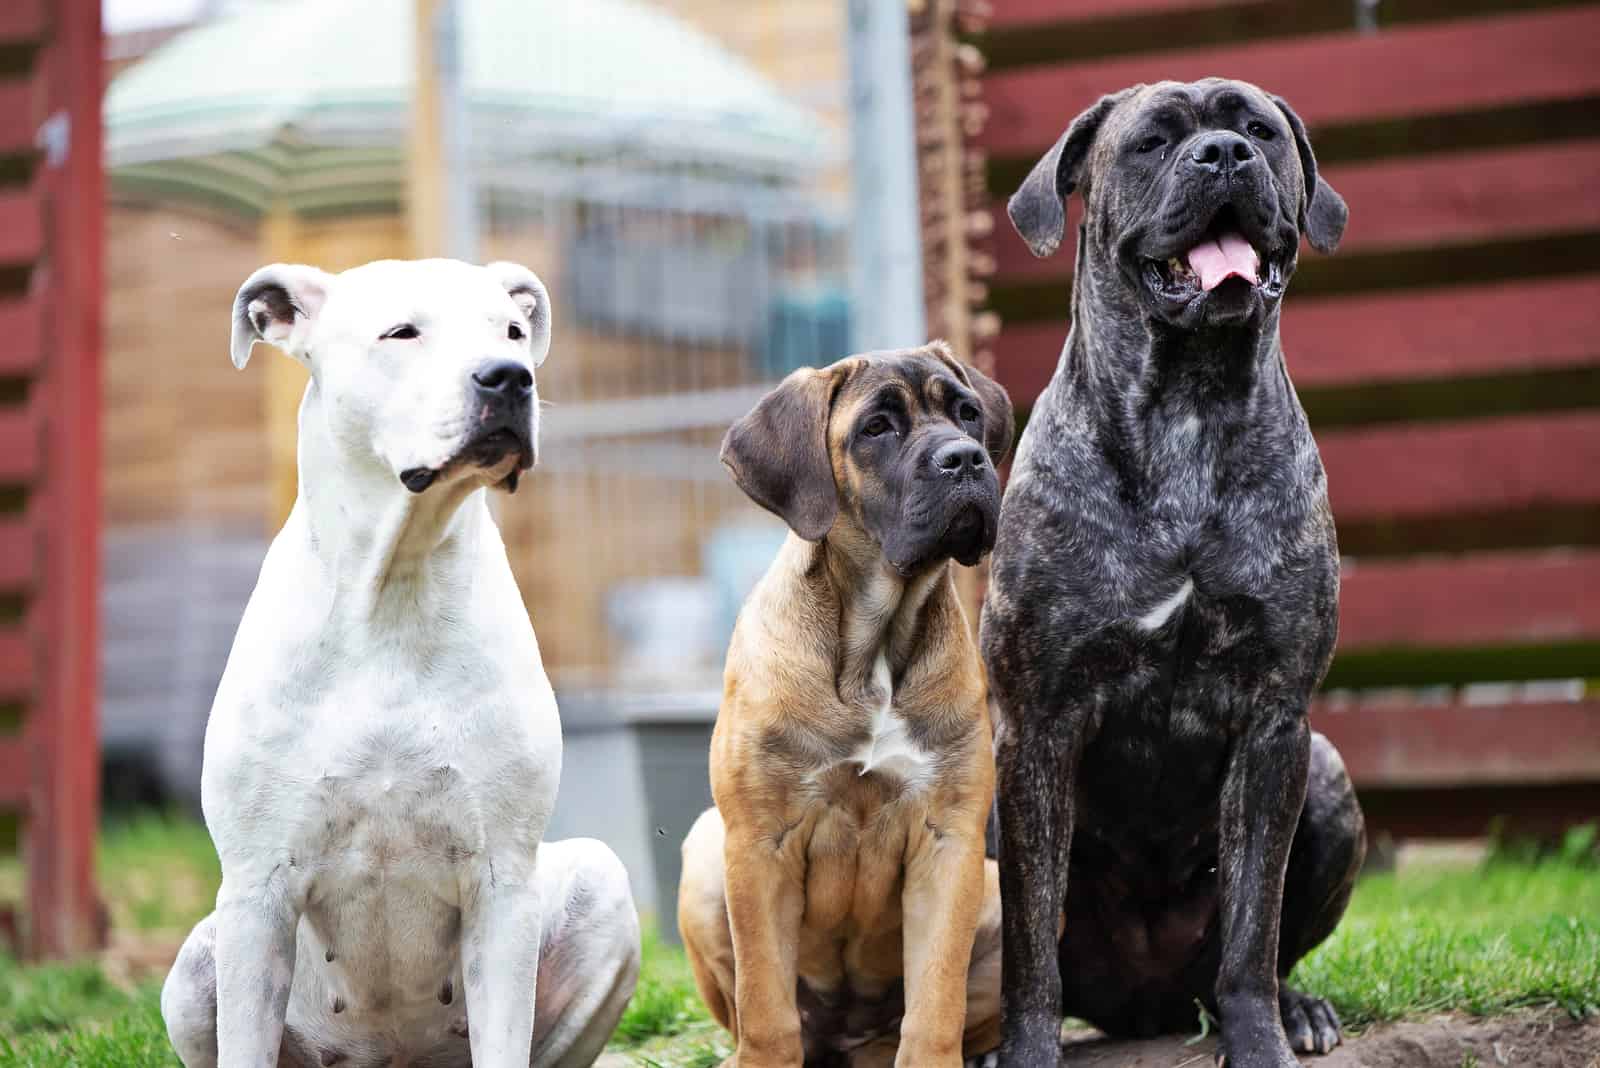 Dogo Argentino and Cane Corso standing outside